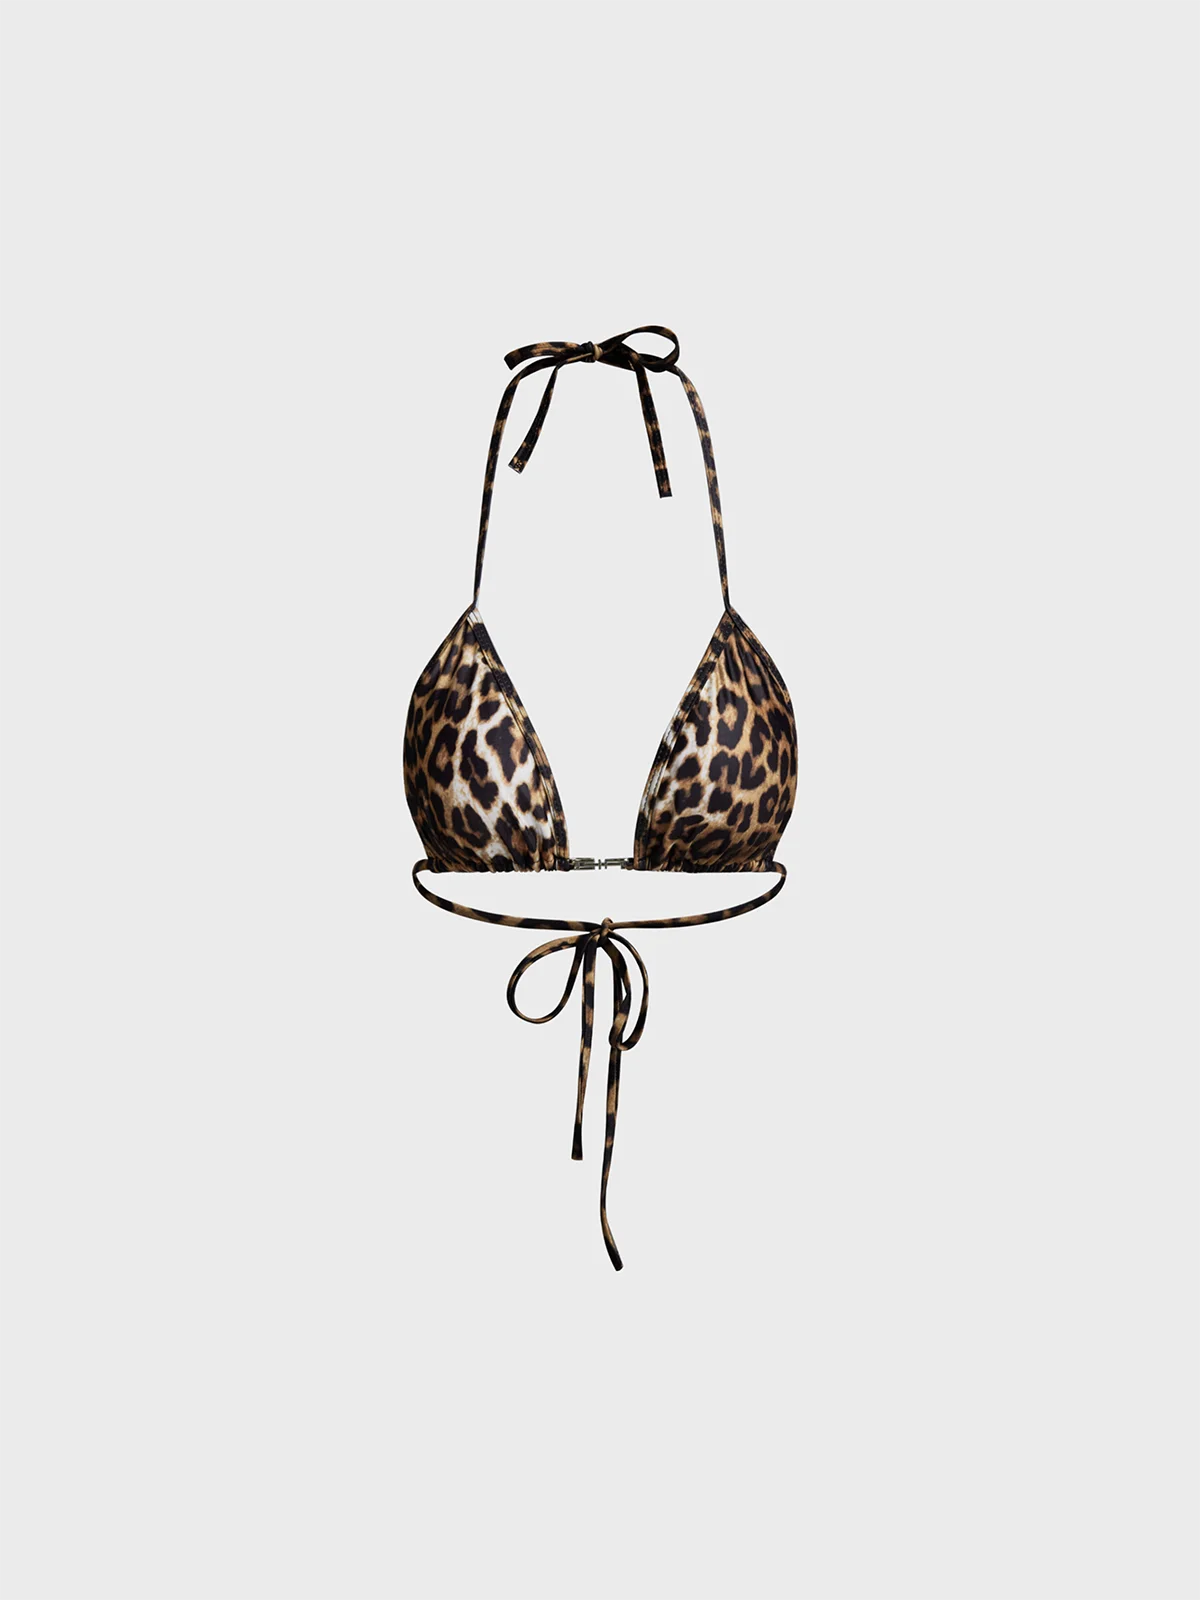 Jersey Leopard Bikini with Cover Up